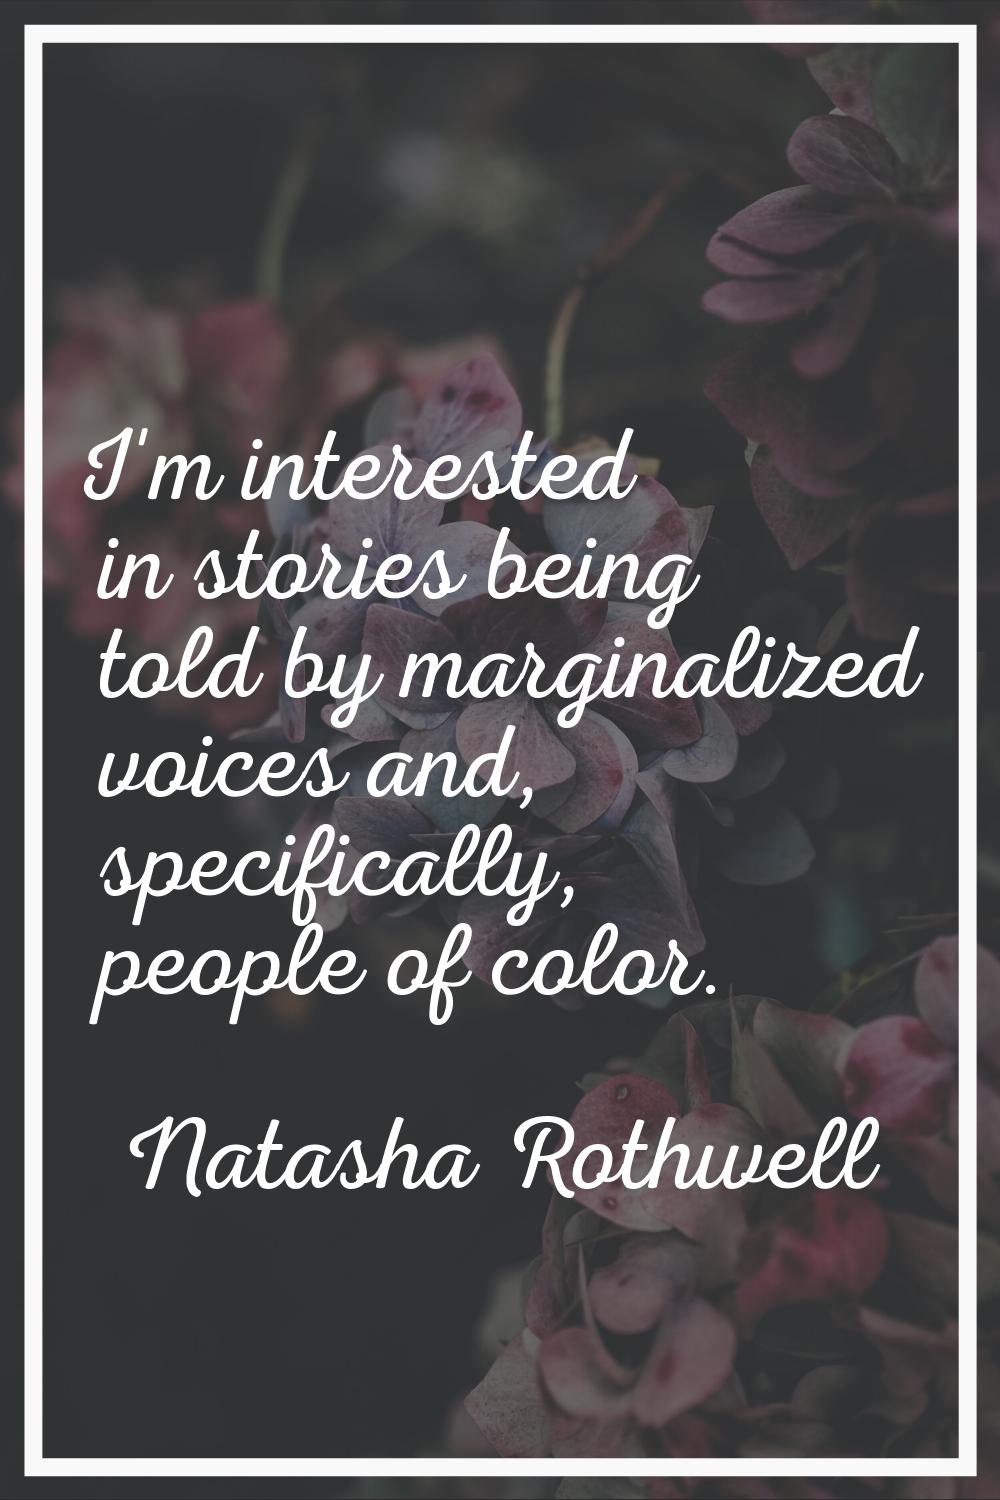 I'm interested in stories being told by marginalized voices and, specifically, people of color.